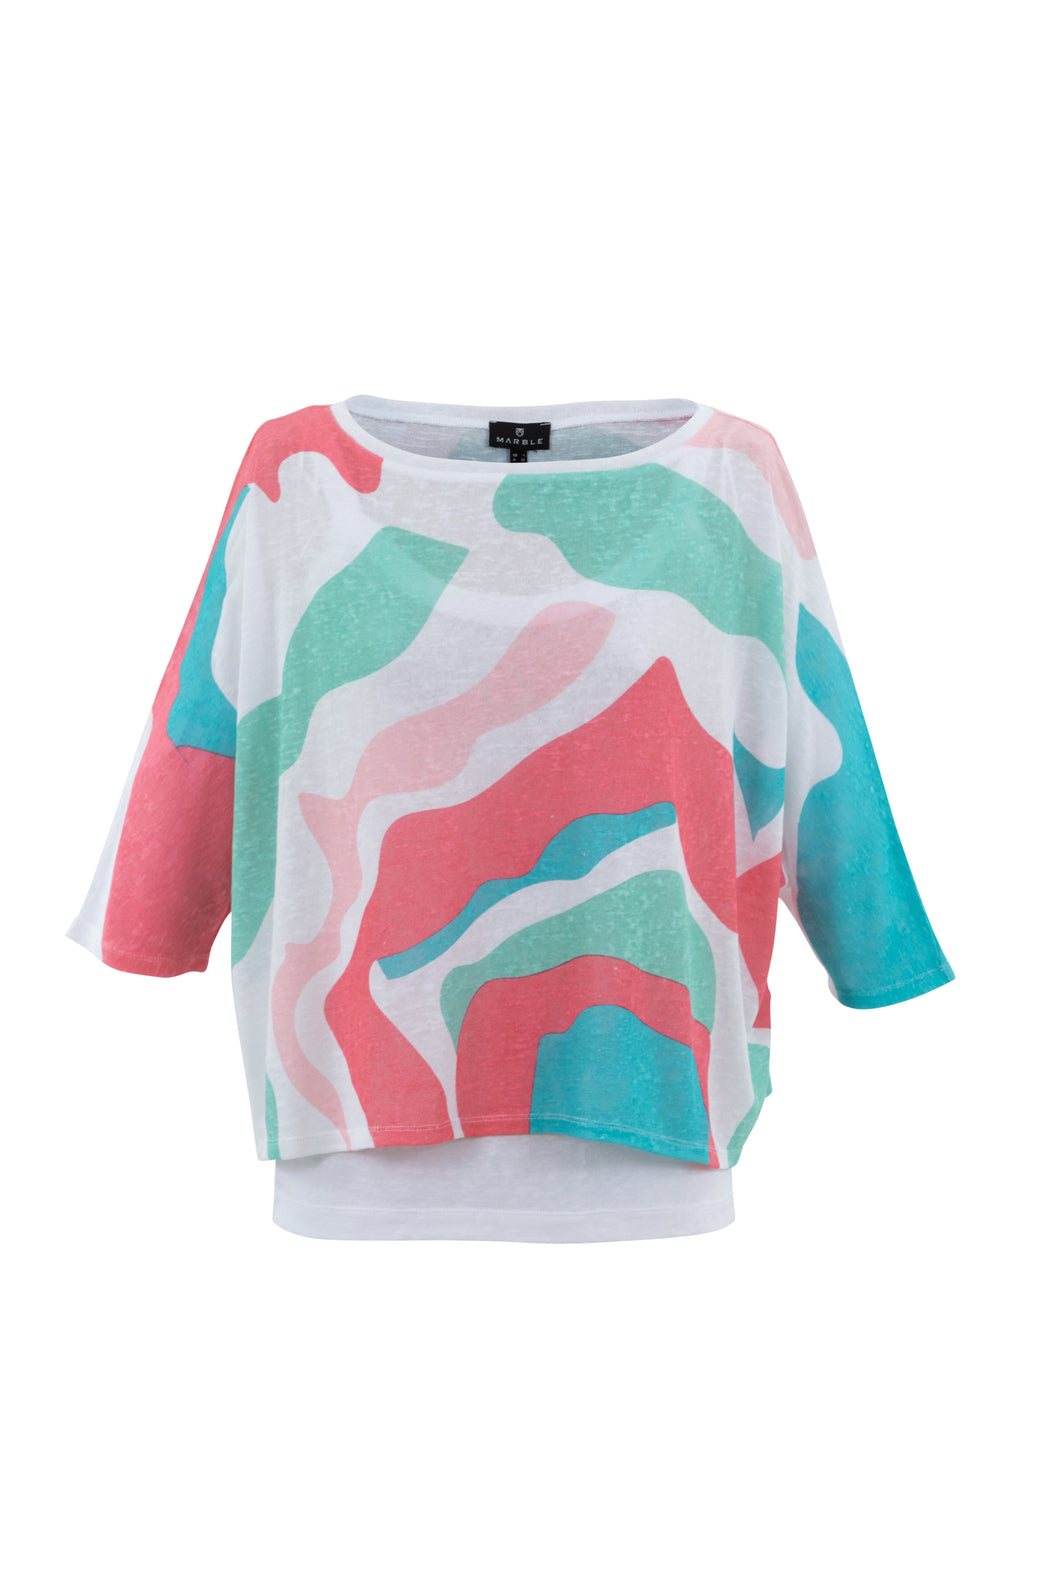 Marble White, Watermelon & Aqua Print Oversized Top with Camisole